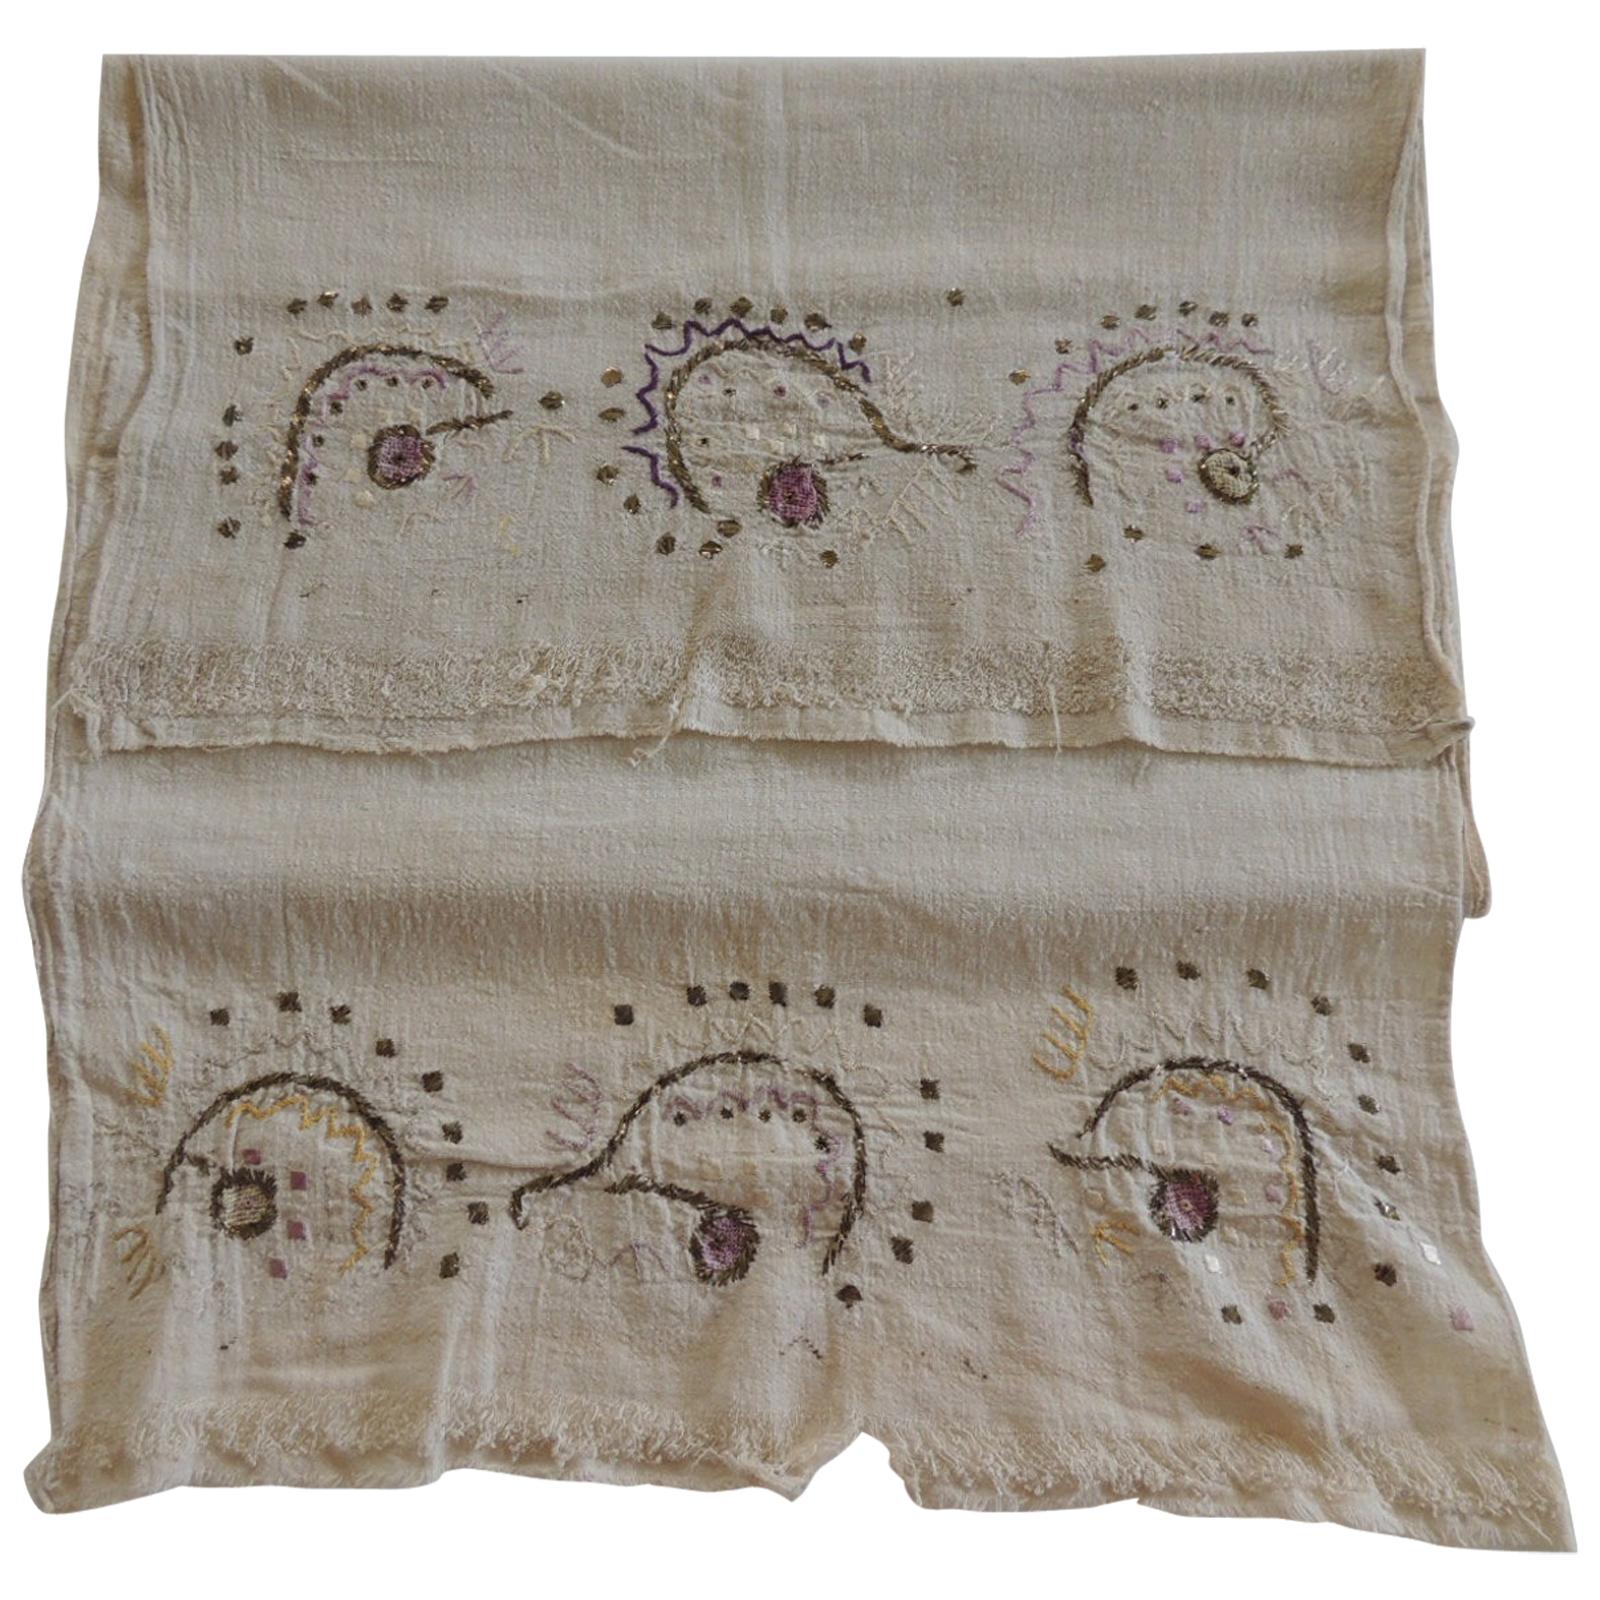 Antique Turkish Embroidered Purple and Gold Textile For Sale